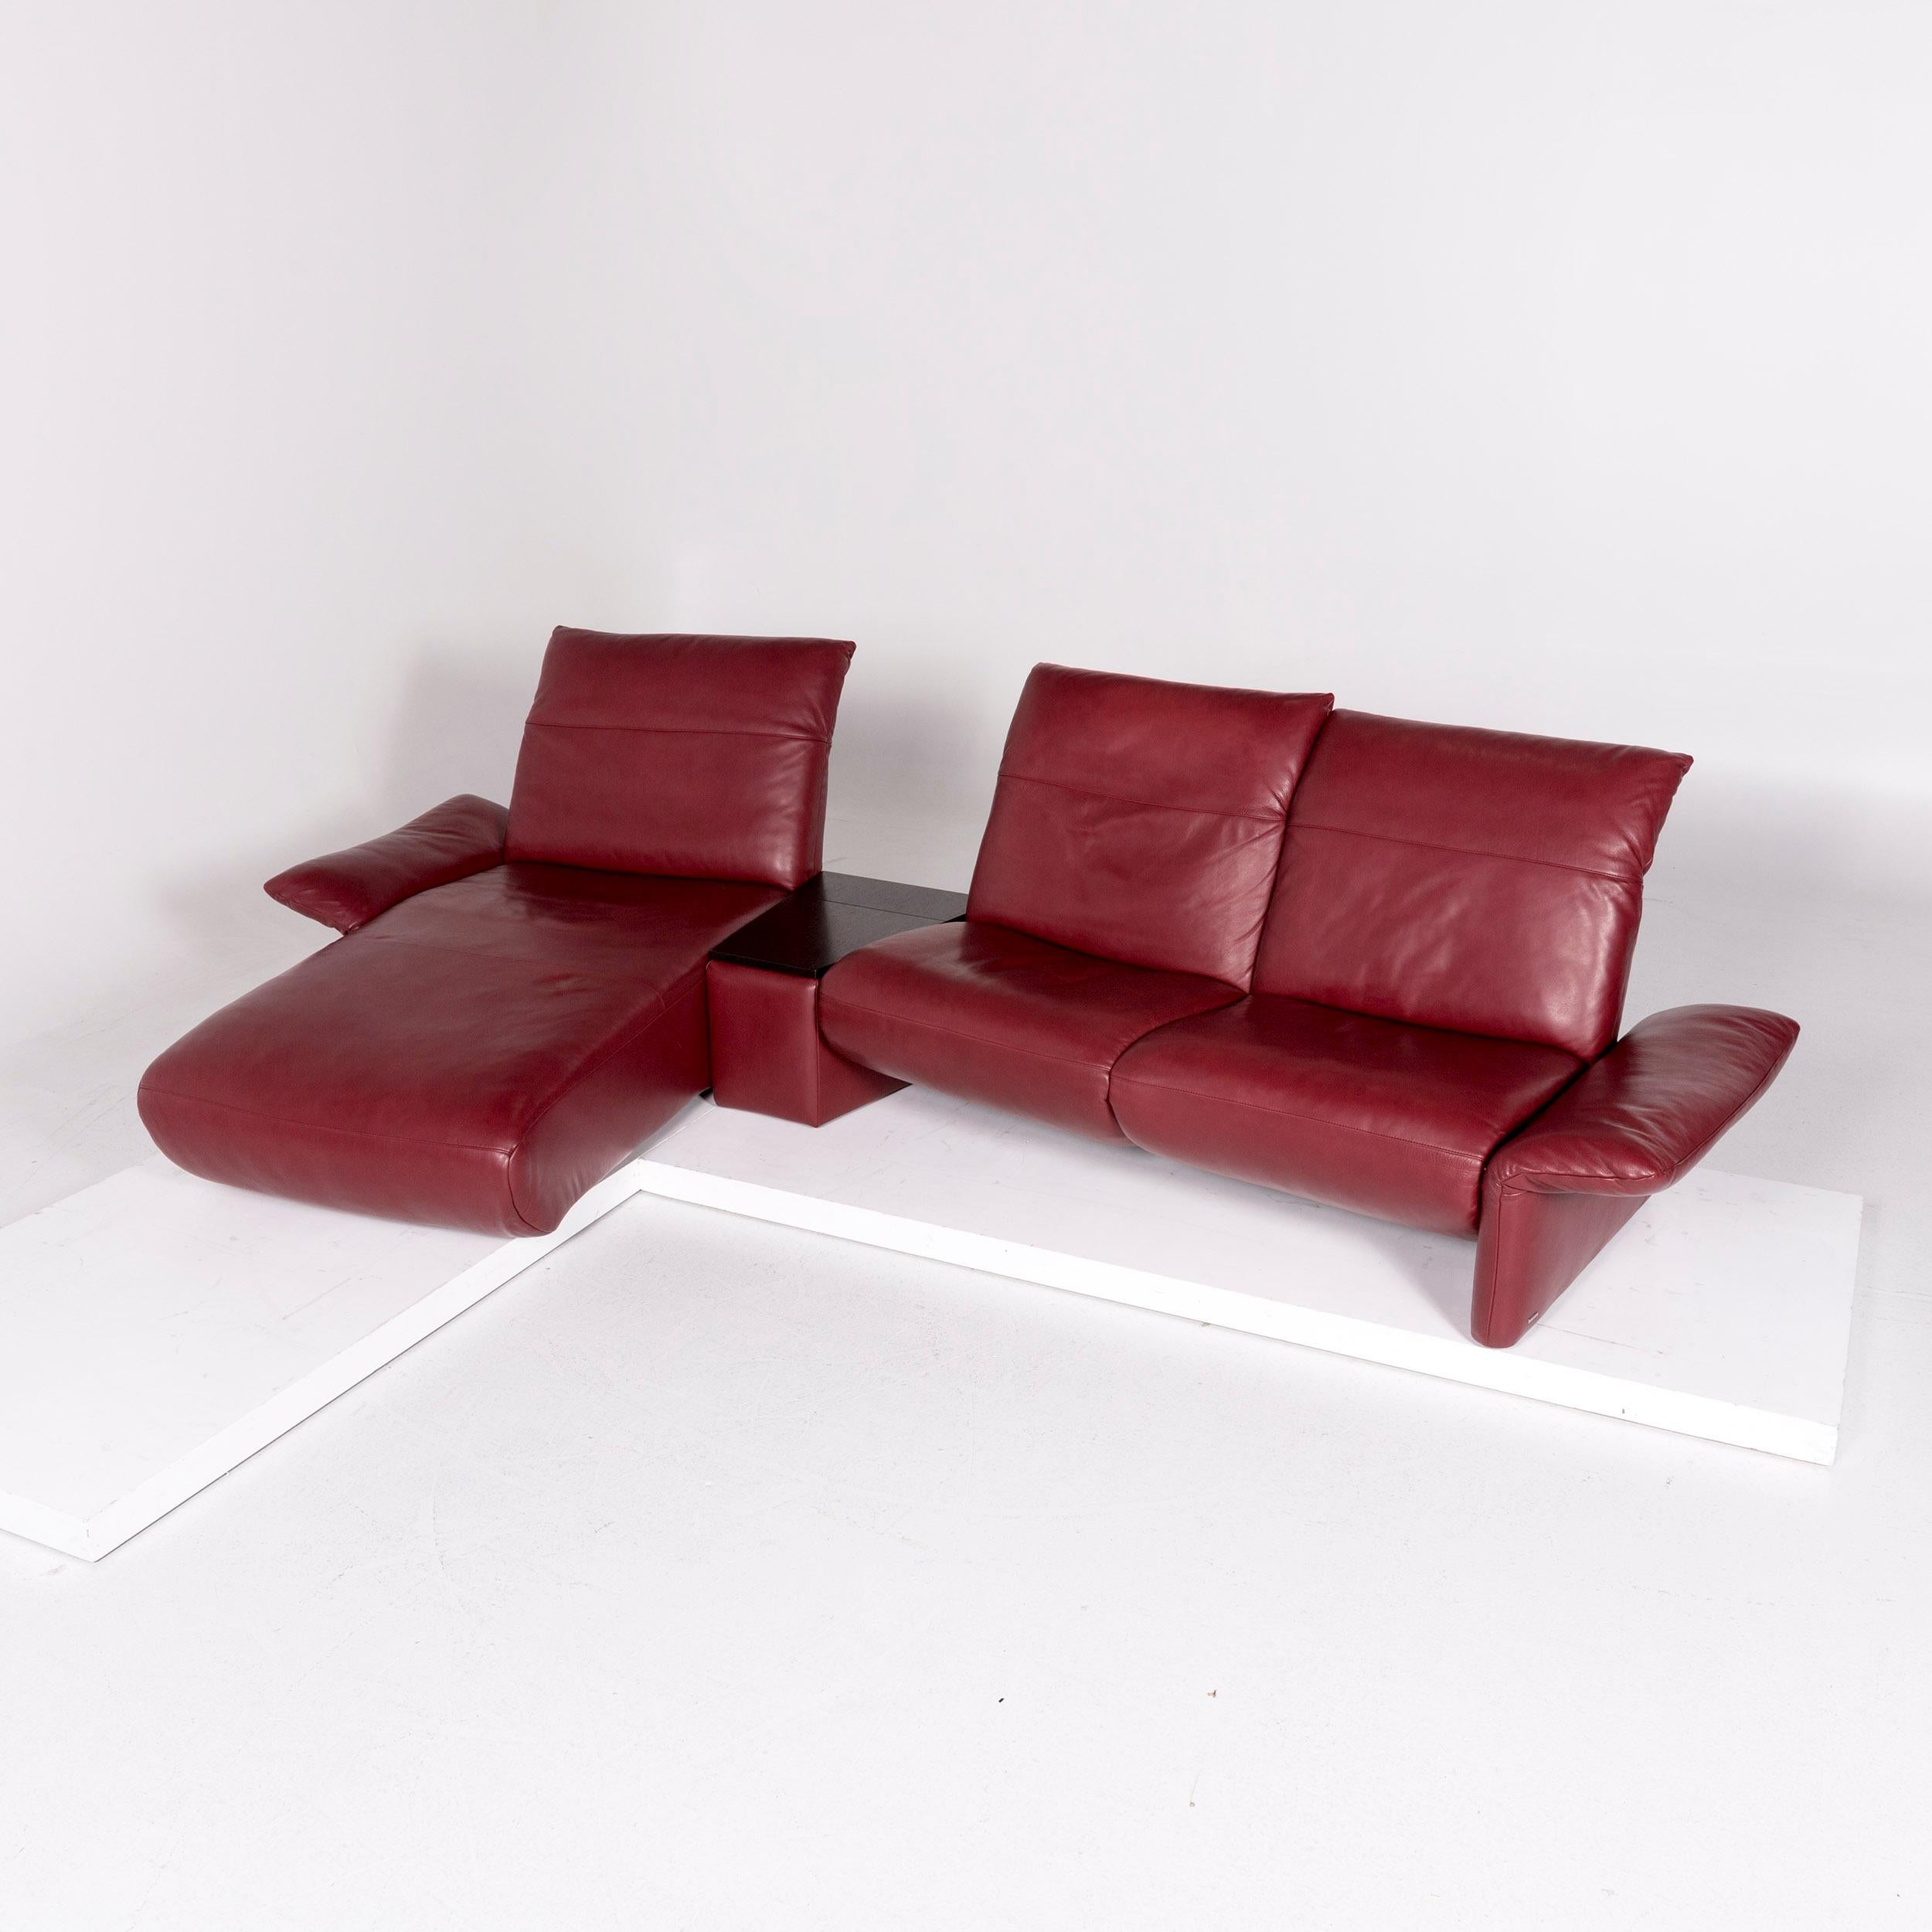 We bring to you a Koinor Elena leather corner sofa red sofa function relaxation couch.

 Product measurements in centimeters:
 
Depth 101
Width 368
Height 95
Seat-height 43
Rest-height 44
Seat-depth 57
Seat-width 179
Back-height 56.
  